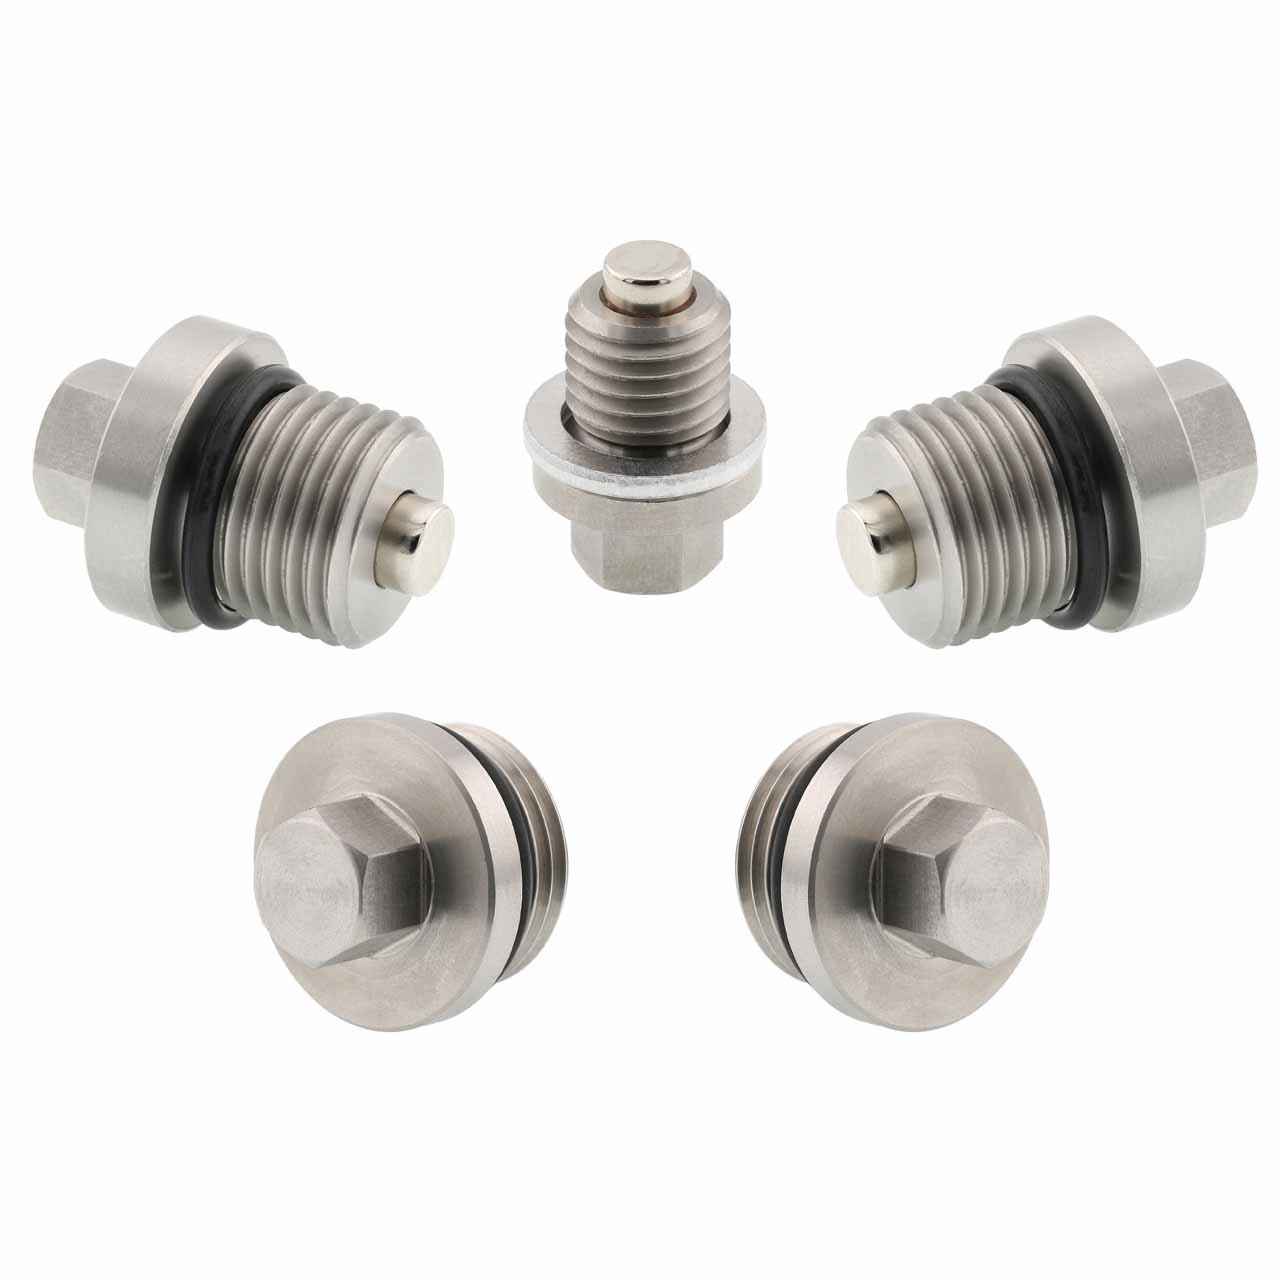 Polaris RZR Trail Sport Magnetic Oil Drain Plug Kit - 2022-2023 - Engine, Transmission, Differential - Made In USA